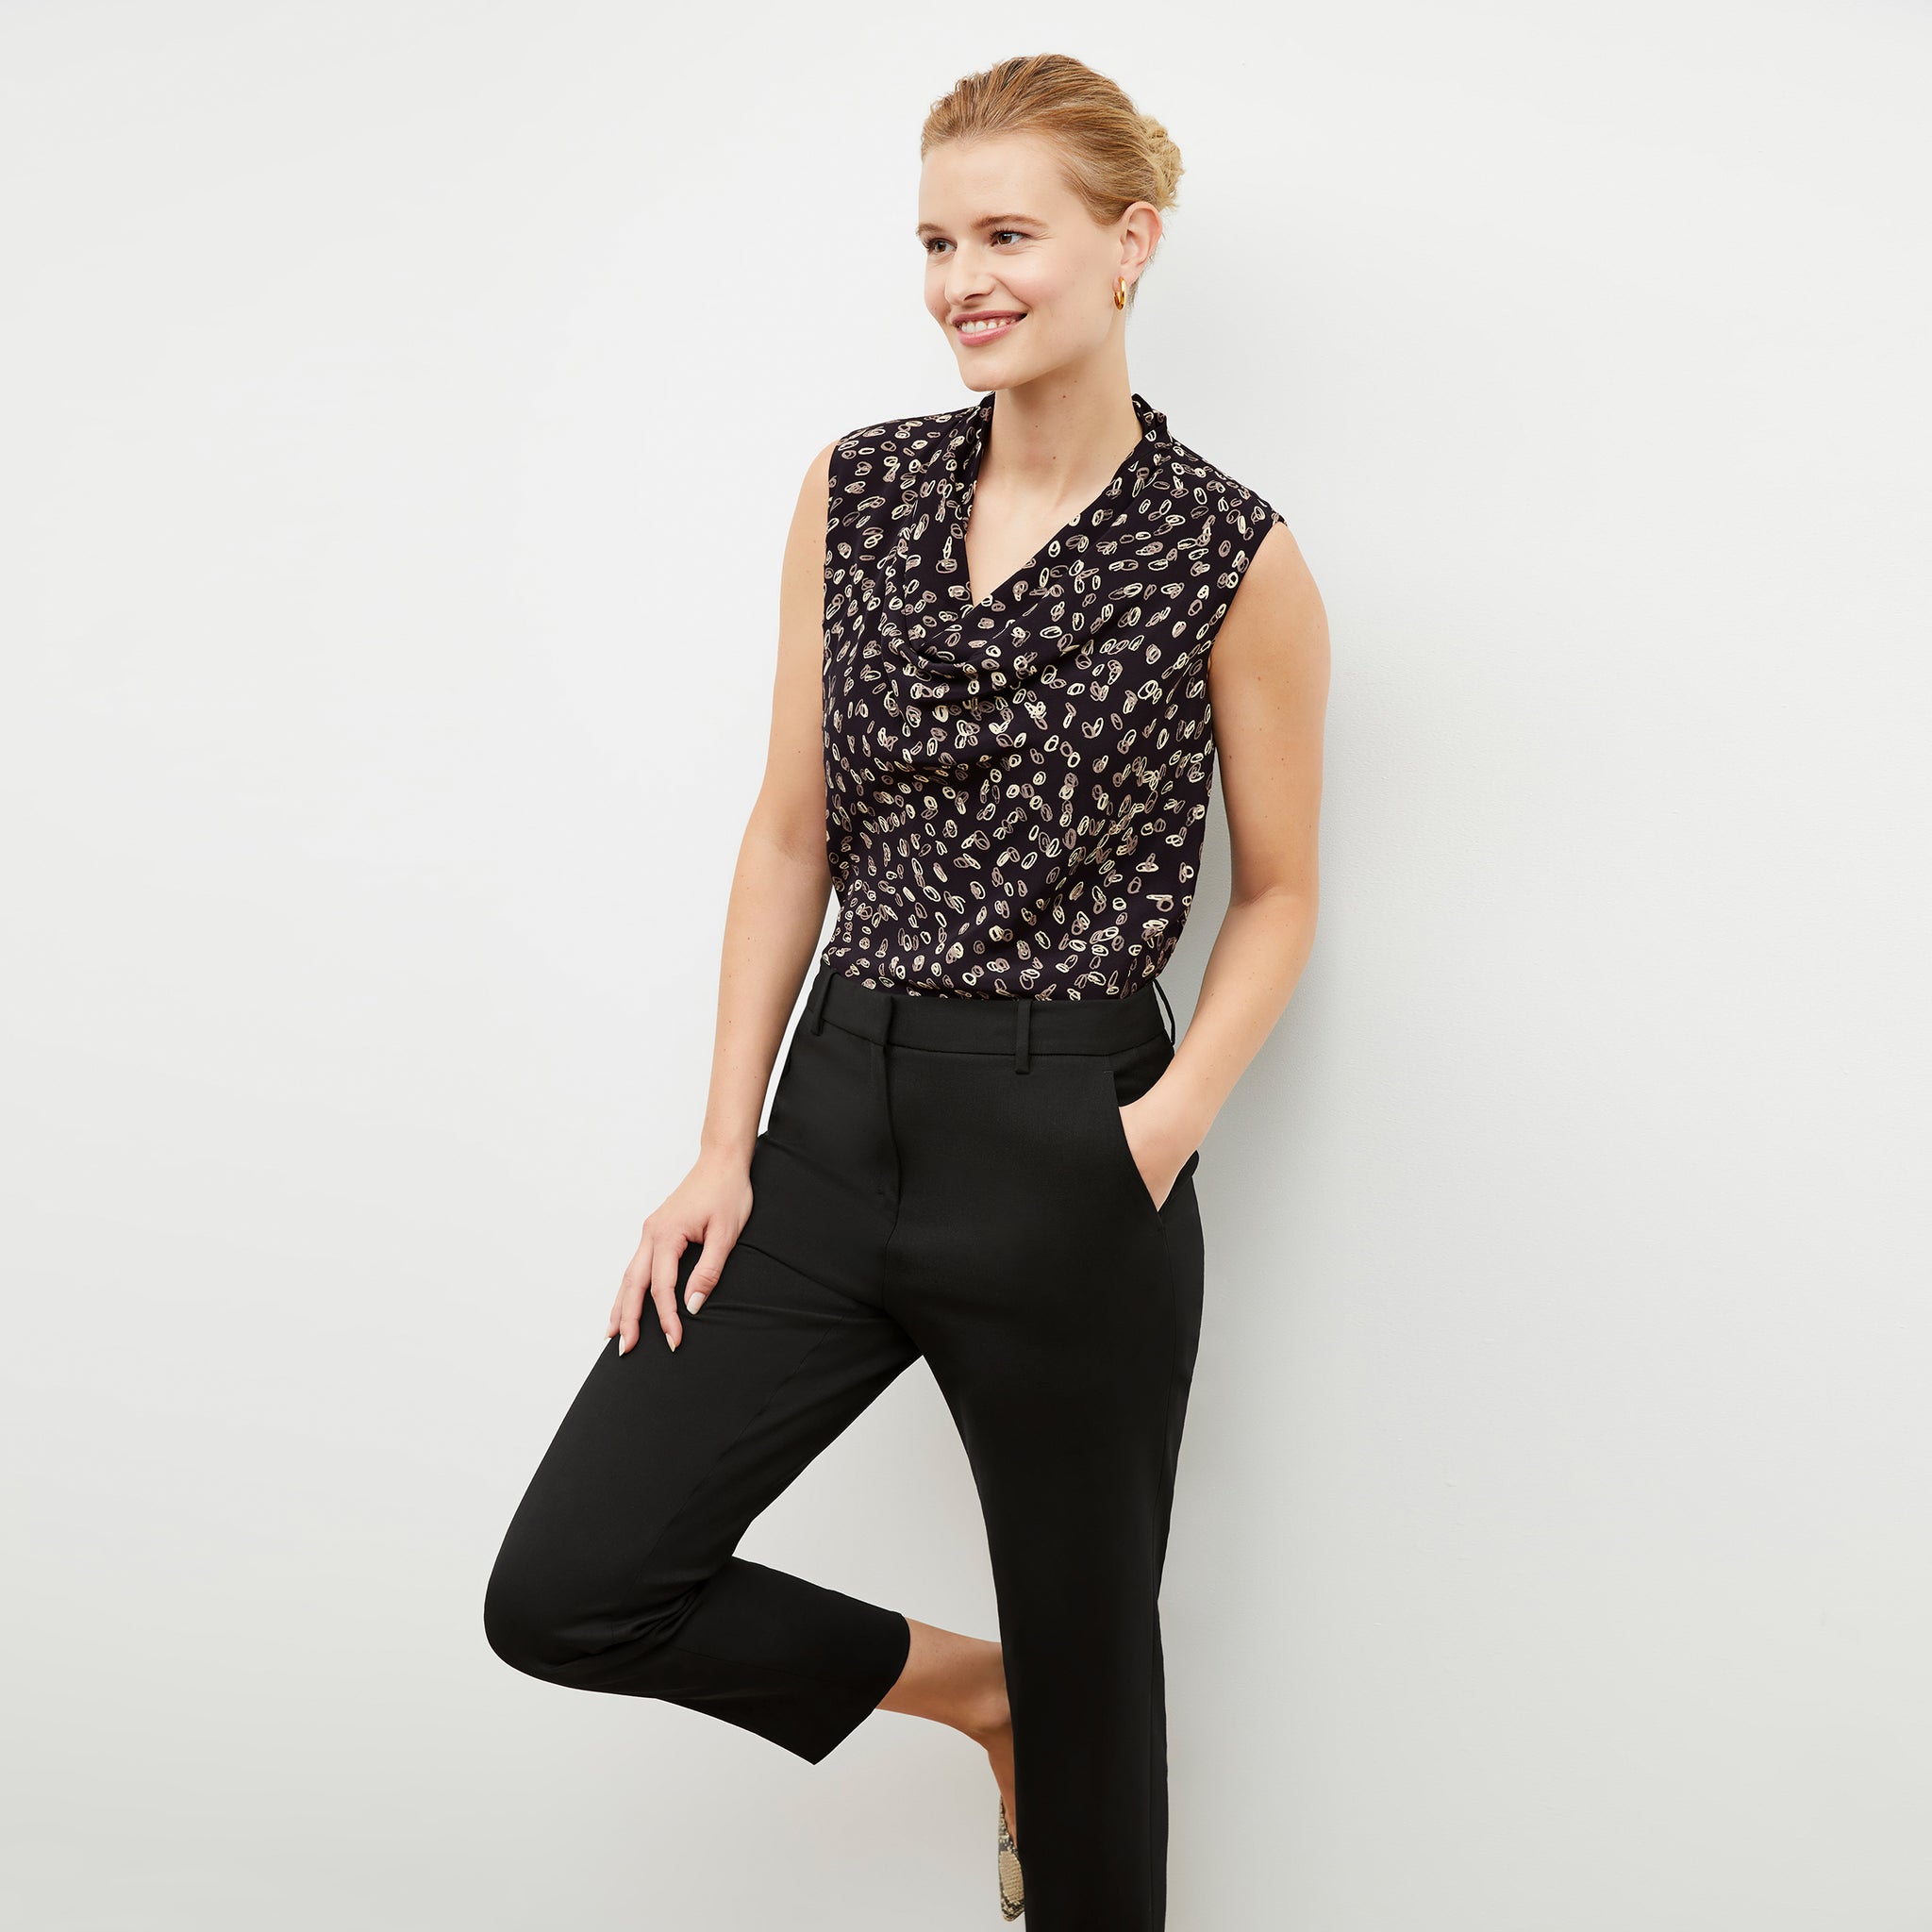 Front image of a woman standing wearing the Mejia pant in black